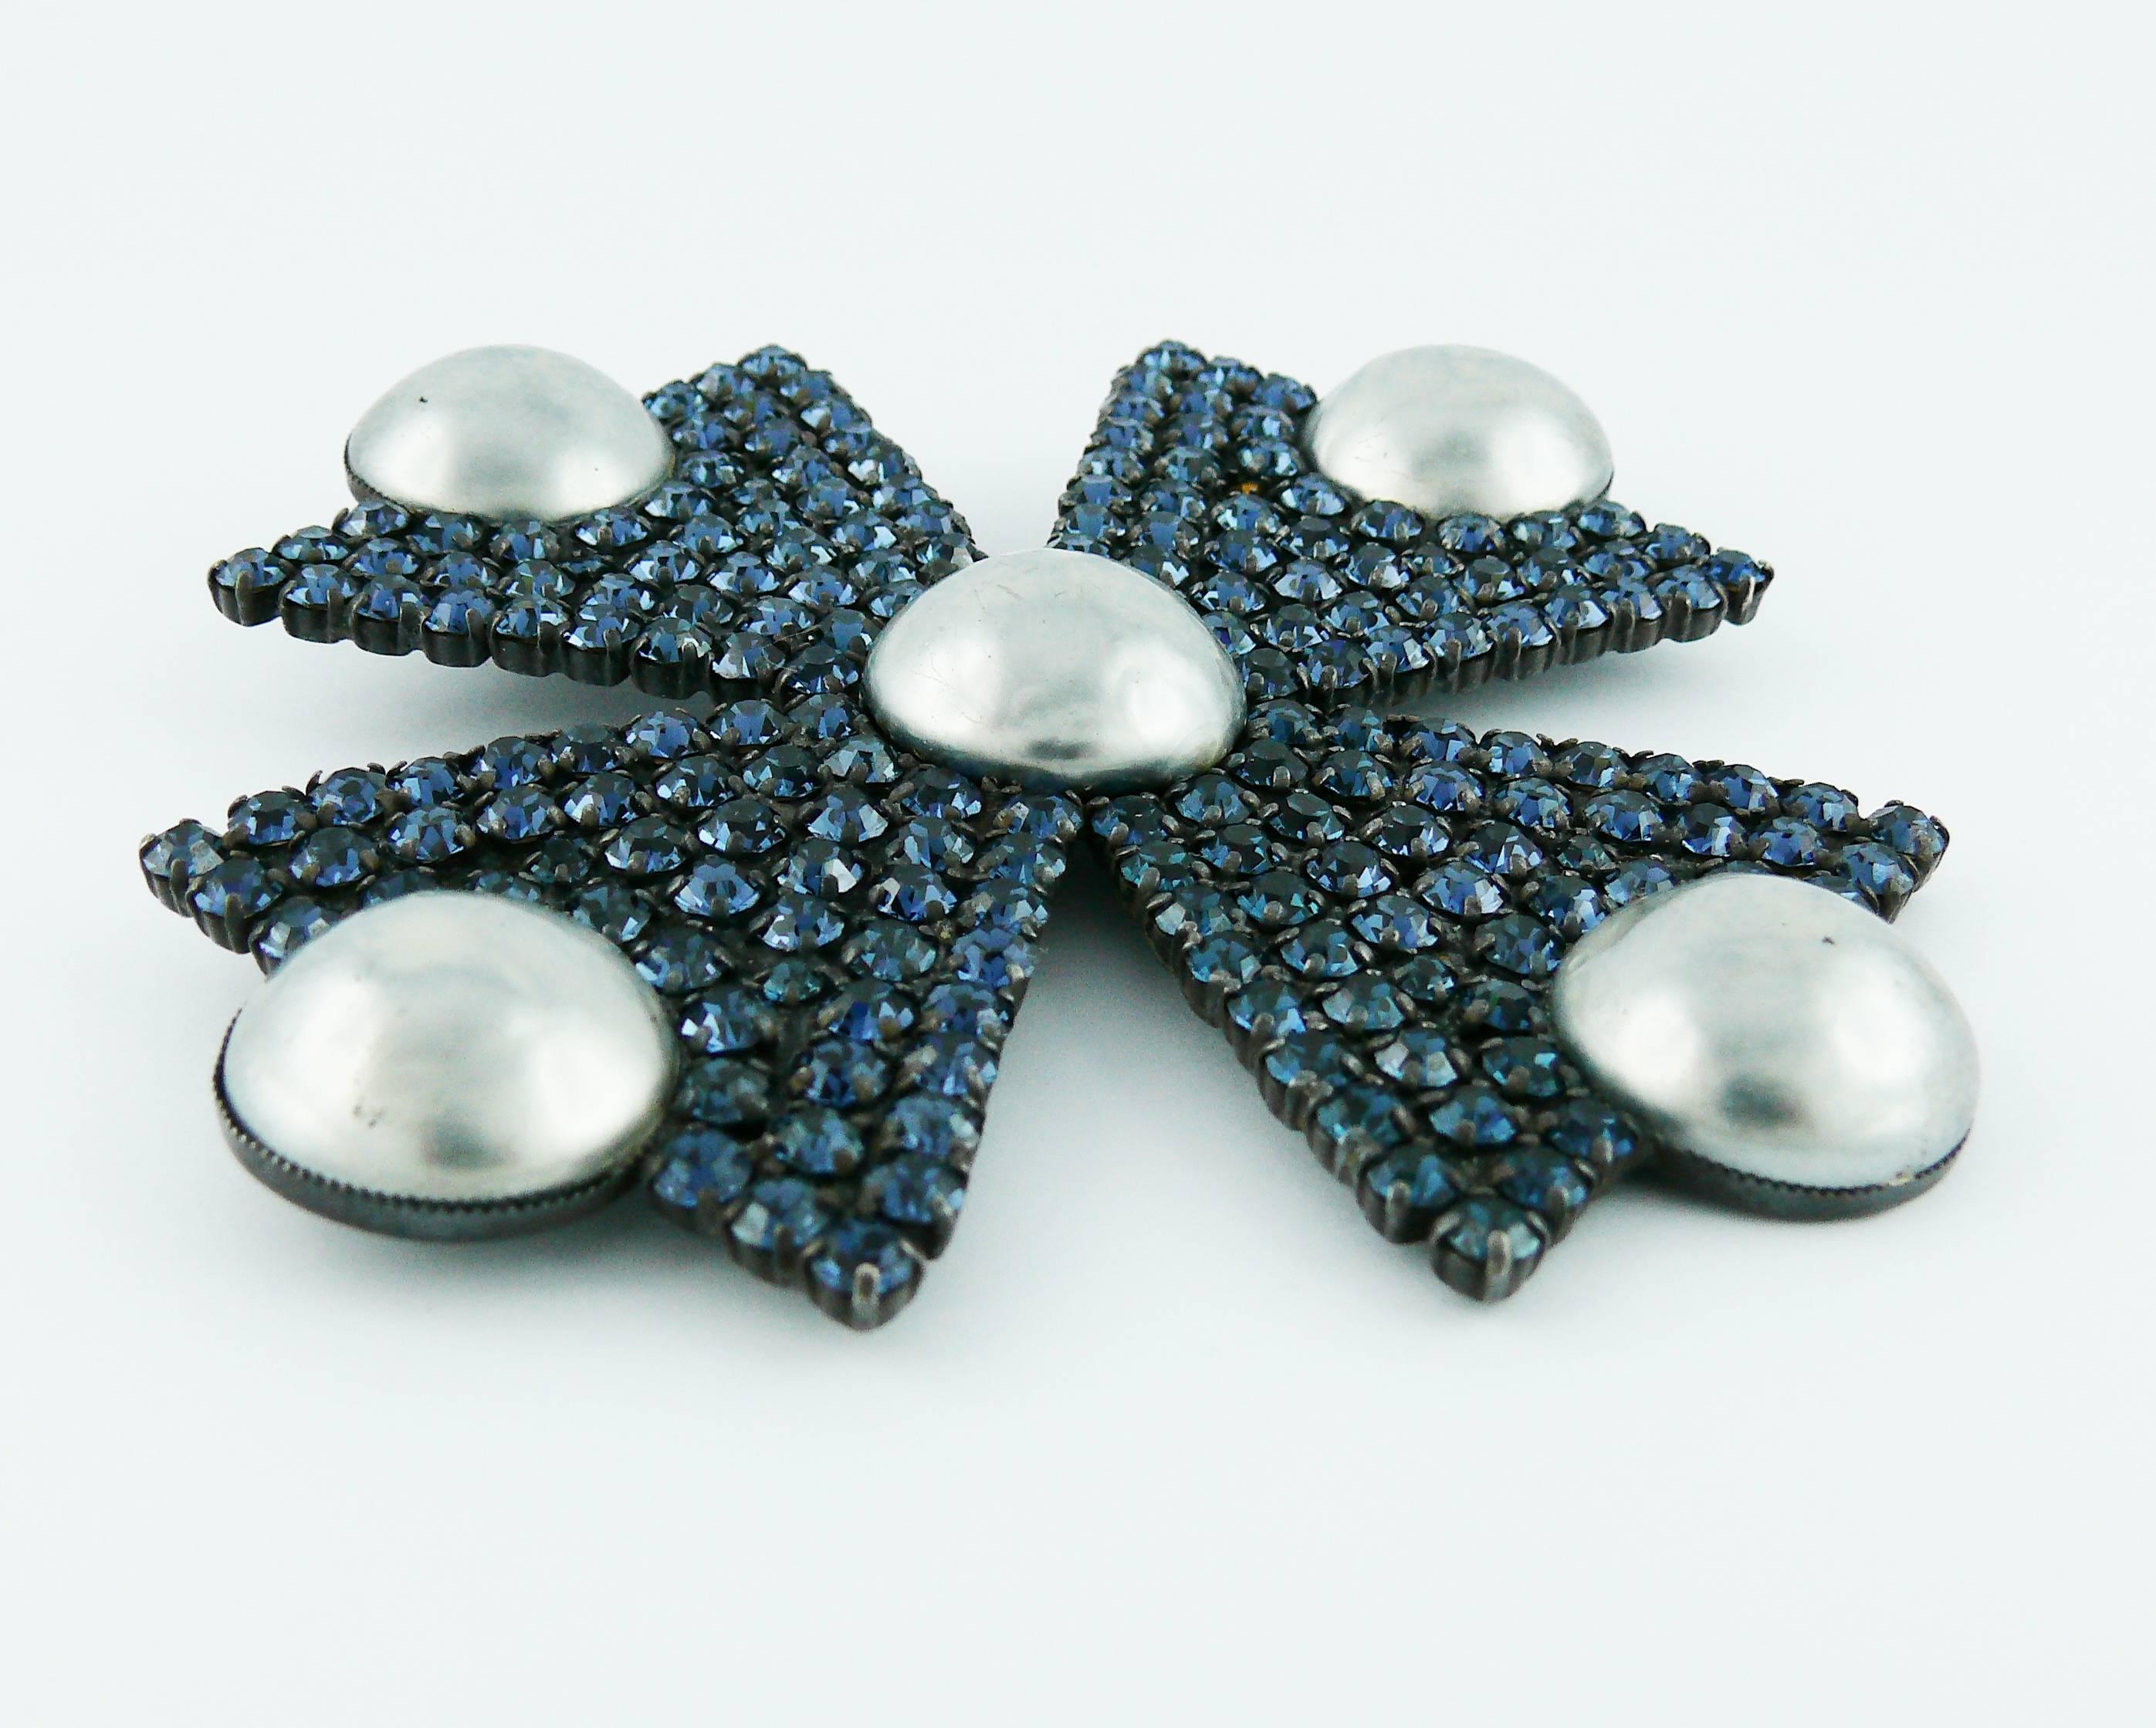 YVES SAINT LAURENT vintage rare massive Maltese cross brooch/pendant embellished with sapphire blue crystals and 5 grey faux pearls in a gun patina metal setting.

Can be worn as a brooch or pendant.

Embossed YSL.

Indicative measurements : max.